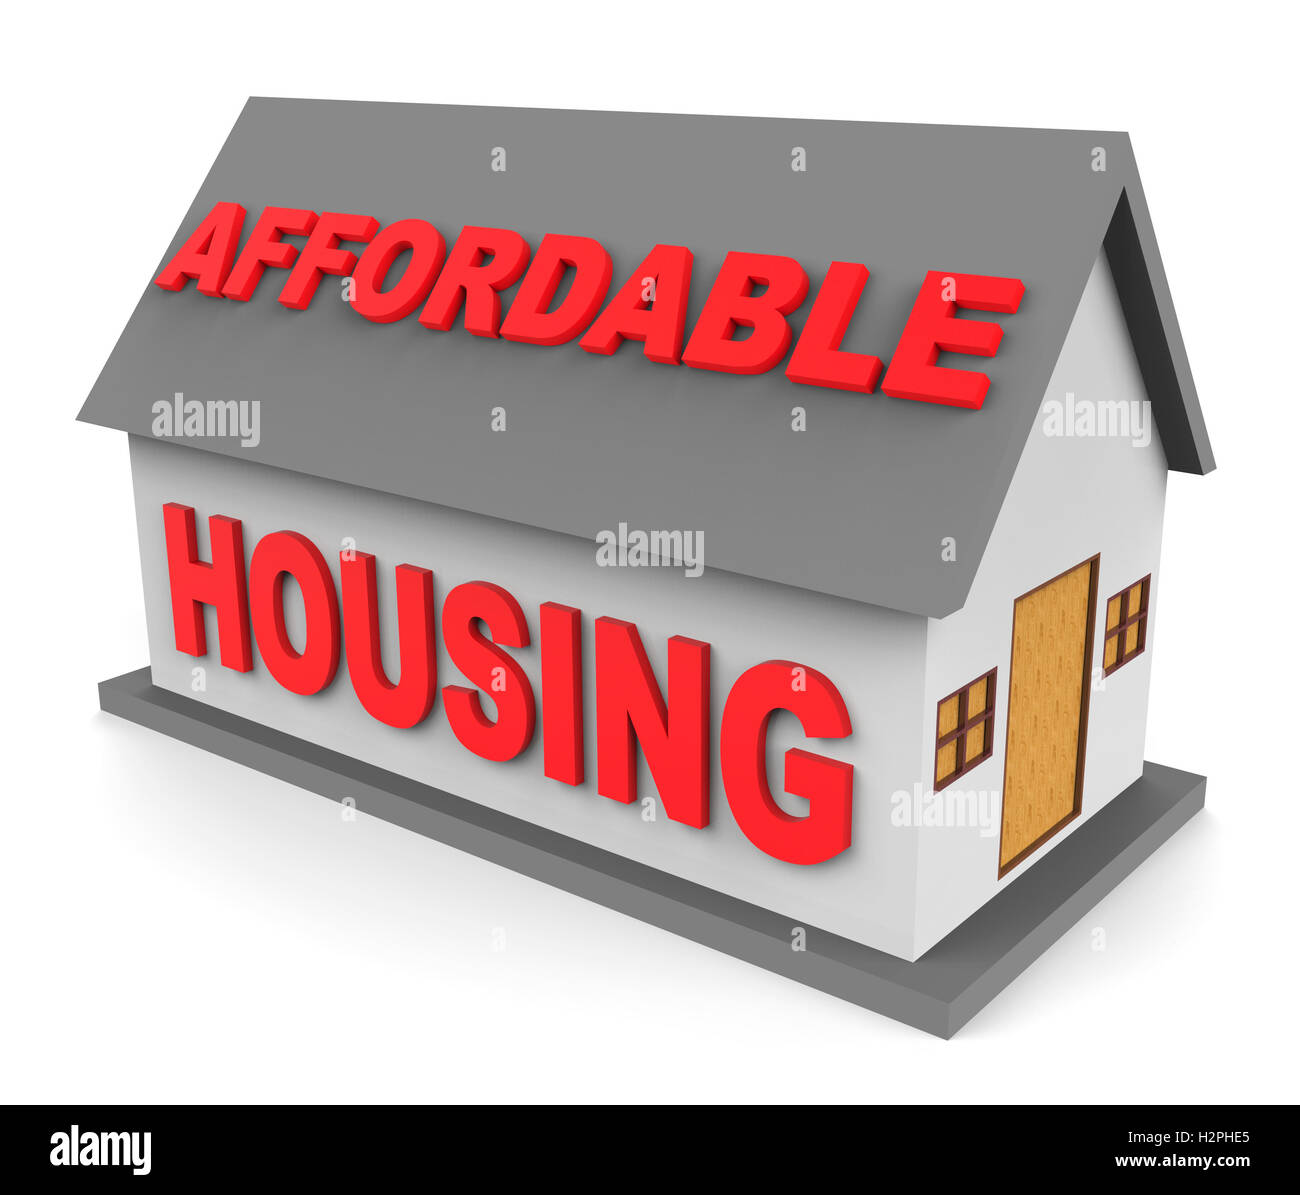 Affordable Housing Representing Low Cost House 3d Rendering Stock Photo